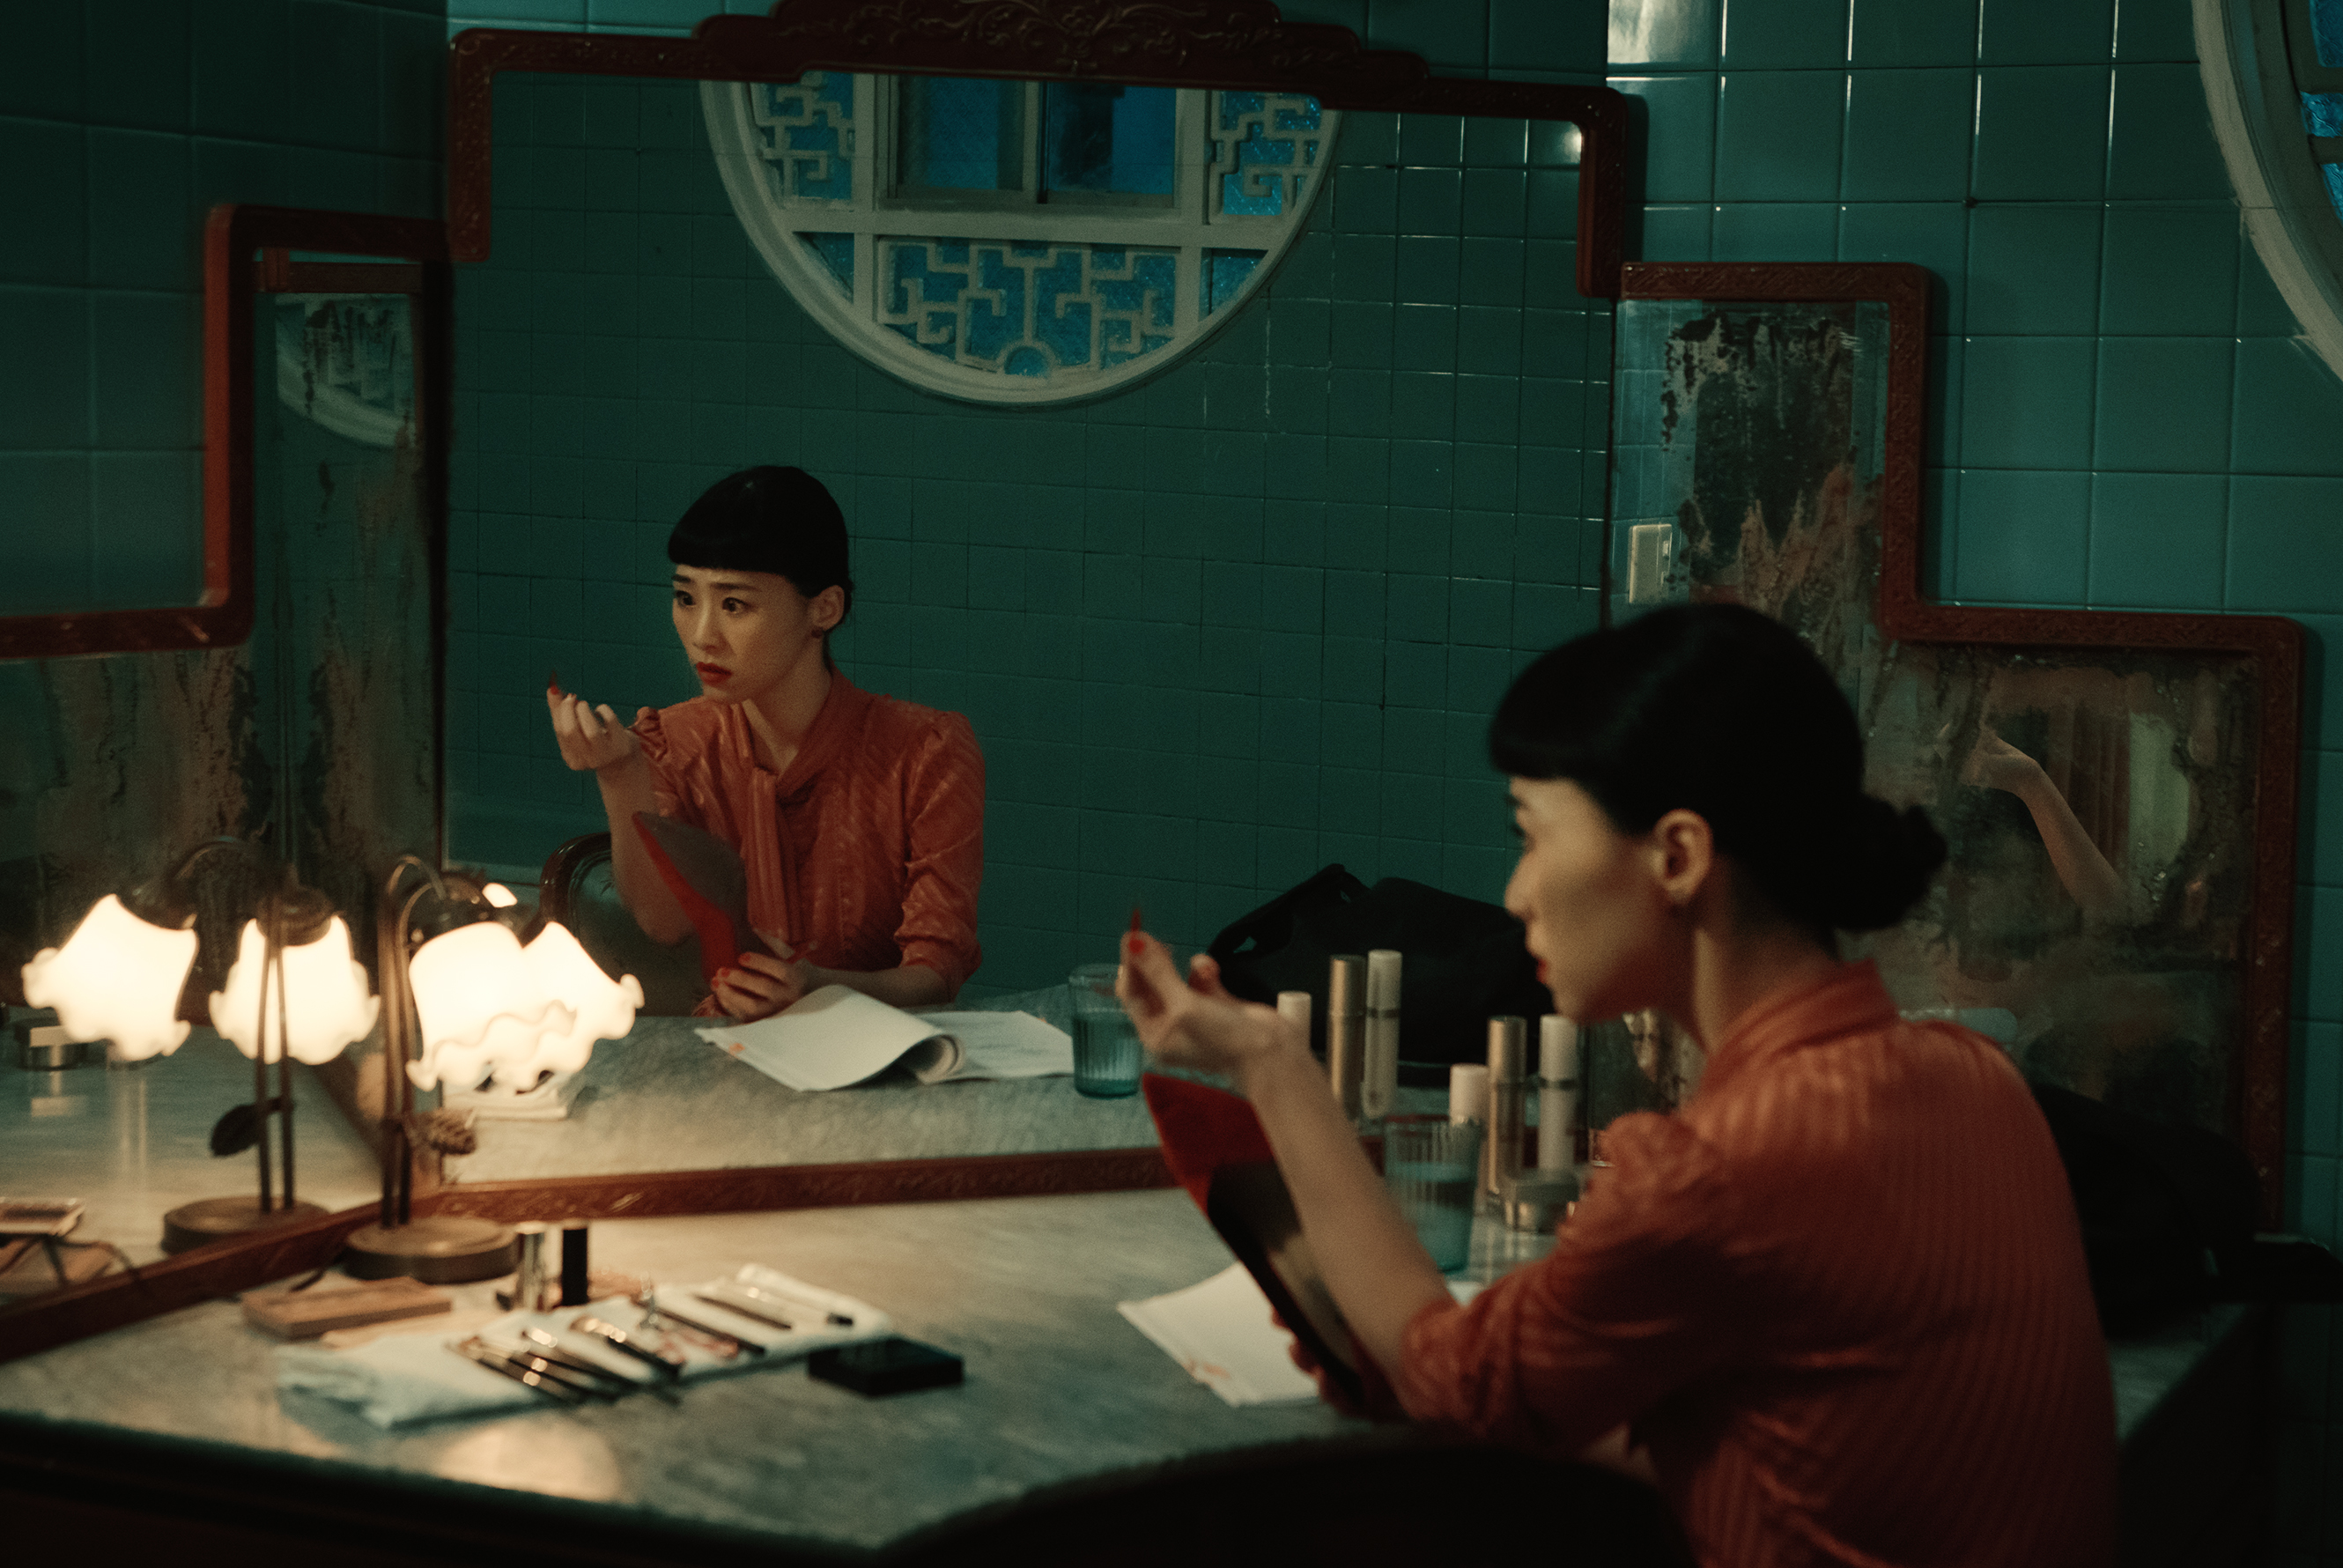 The U.S. Premiere and Theatrical Release of “Nina Wu” will Take Place in N.Y., with Director Midi Z, Writer/Star Ke-Xi Wu Present at Post-Screening Q&A Sessions